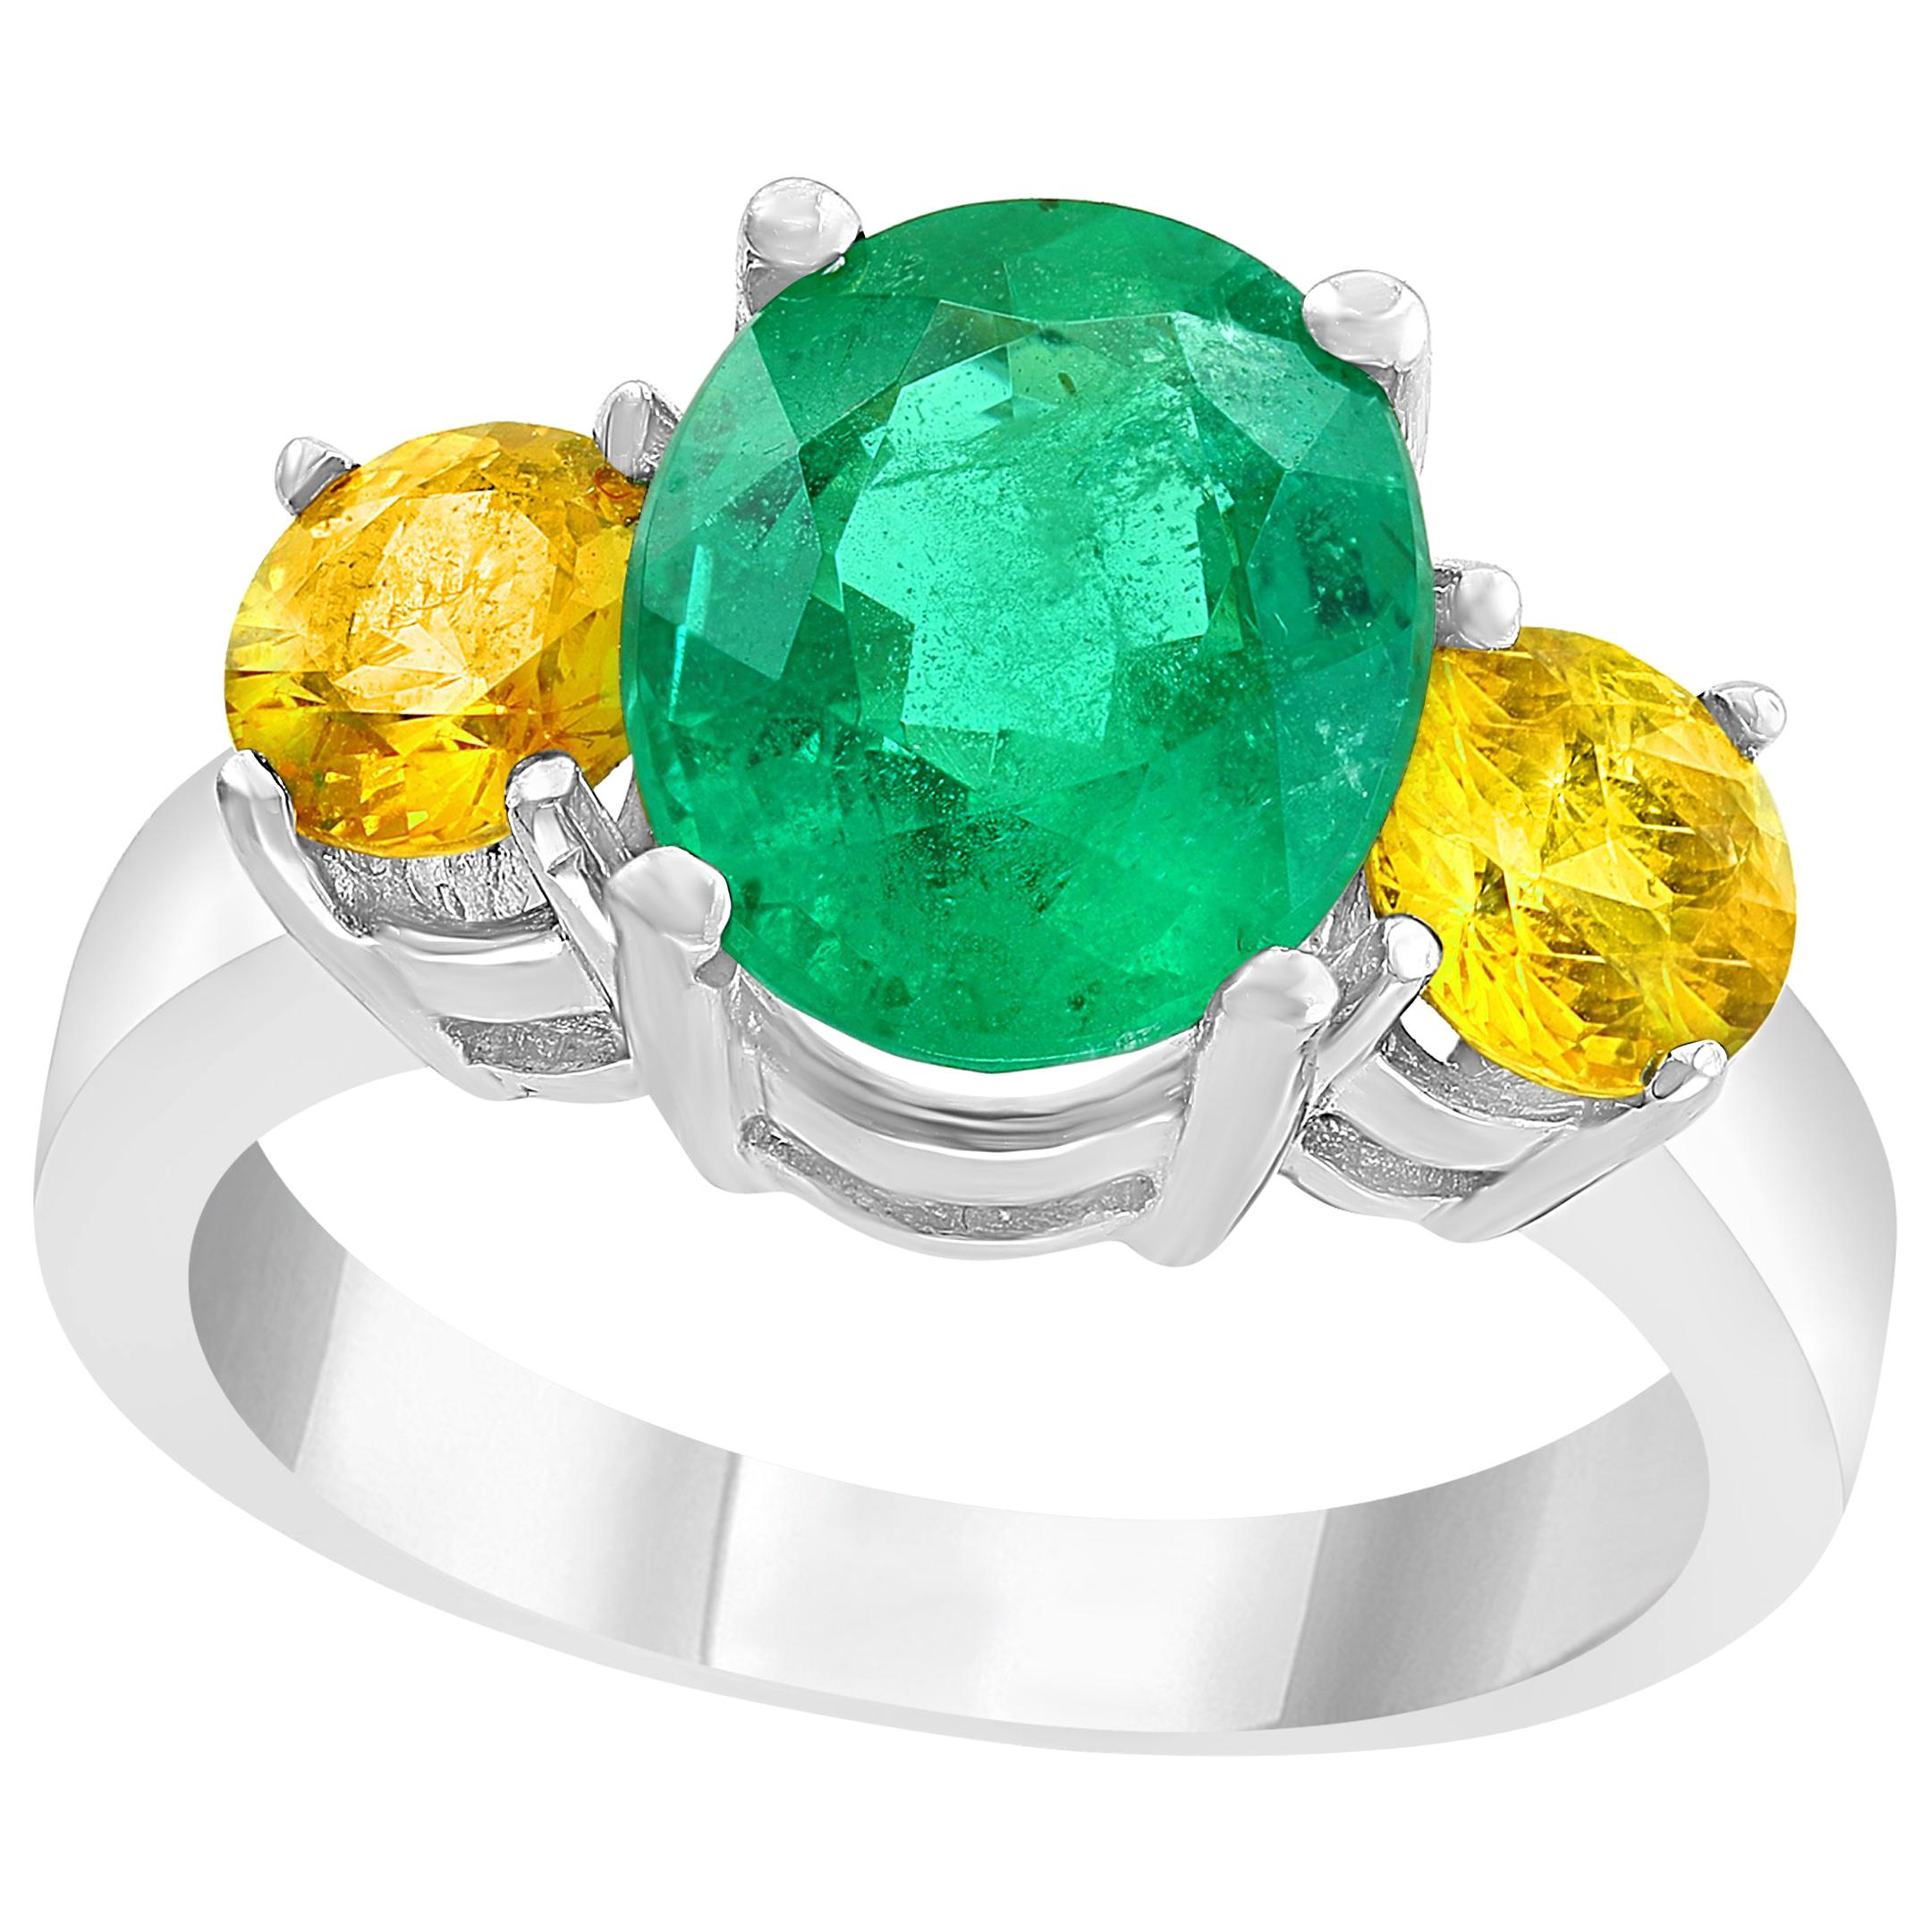 3 Carat Oval Cut Colombian Emerald and Yellow Sapphire 18 Karat Gold Ring